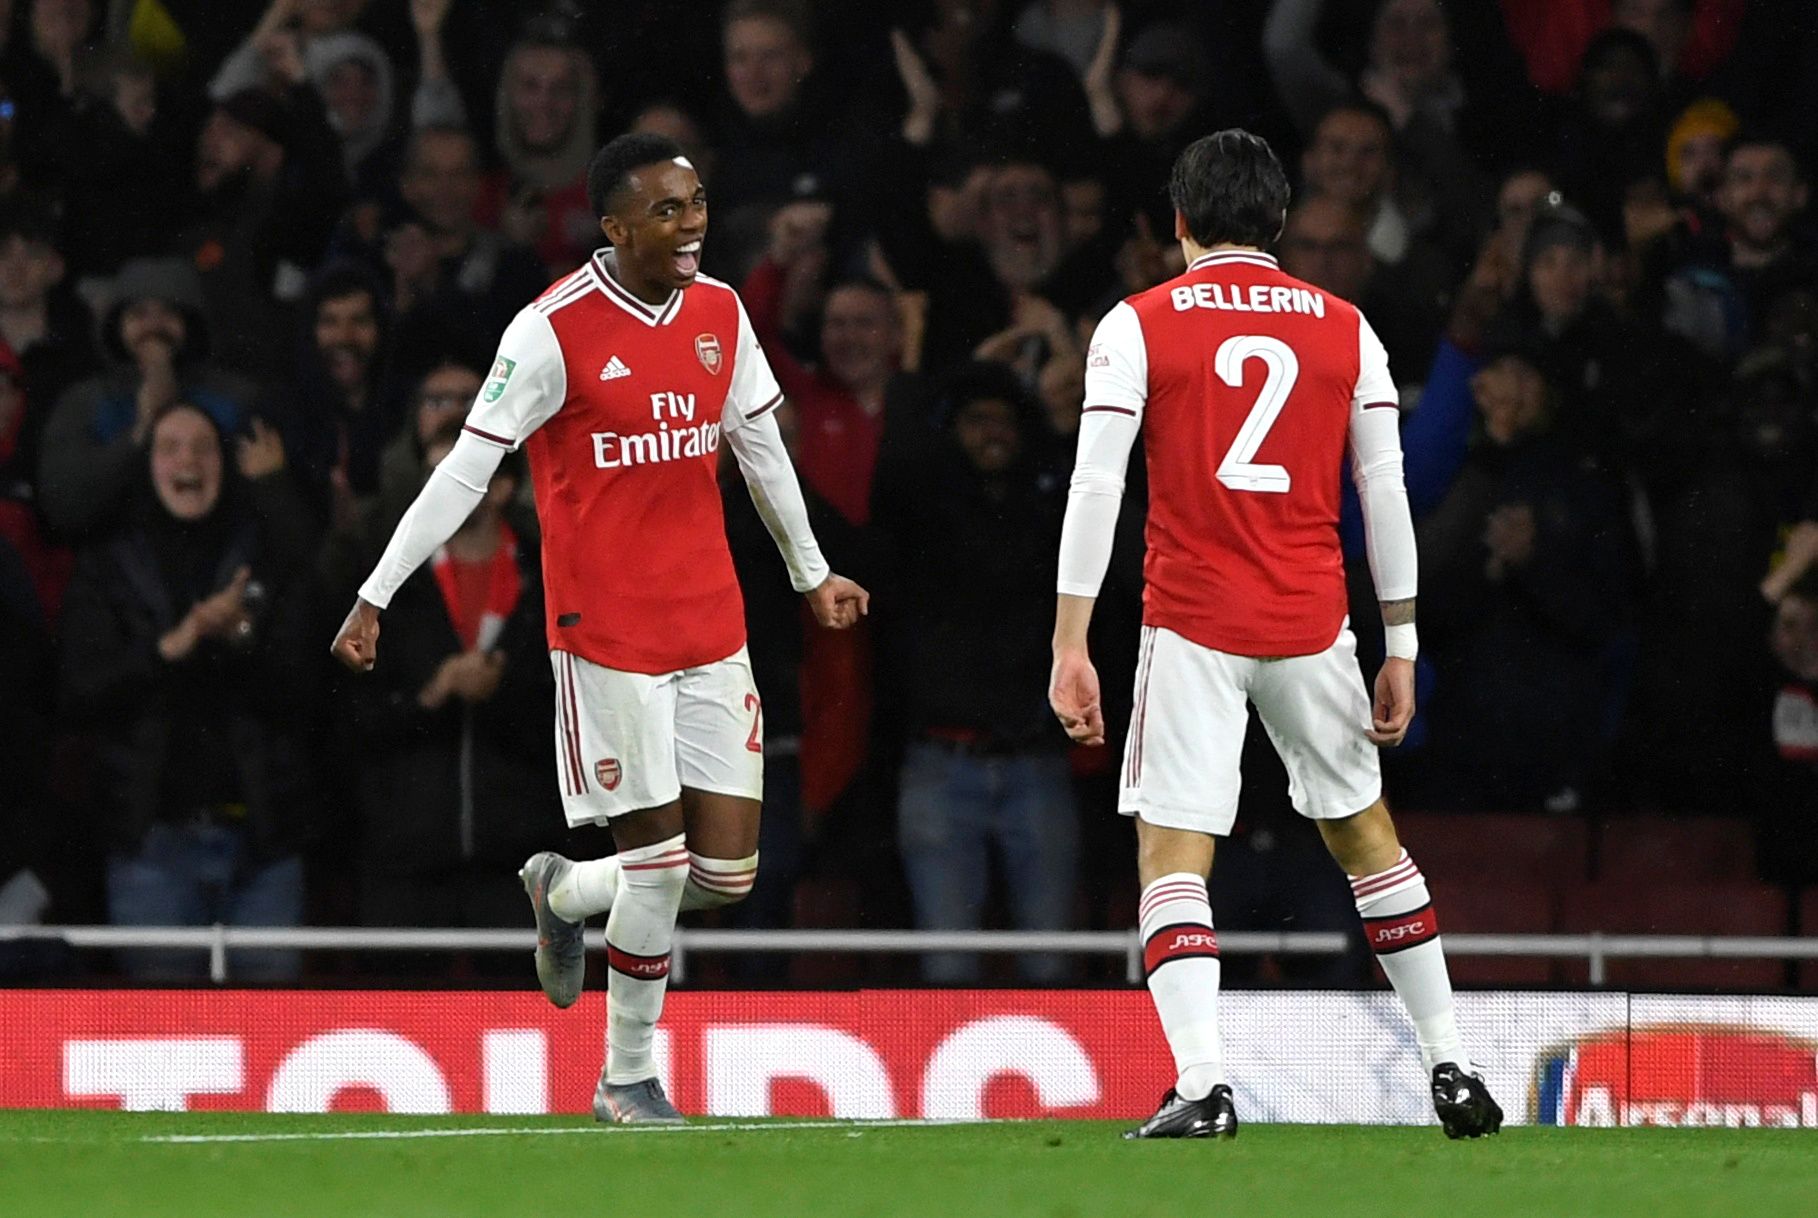 Soccer Football - Carabao Cup - Third Round - Arsenal v Nottingham Forest - Emirates Stadium, London, Britain - September 24, 2019  Arsenal's Joe Willock celebrates scoring their third goal               Action Images via Reuters/Tony O'Brien  EDITORIAL USE ONLY. No use with unauthorized audio, video, data, fixture lists, club/league logos or 